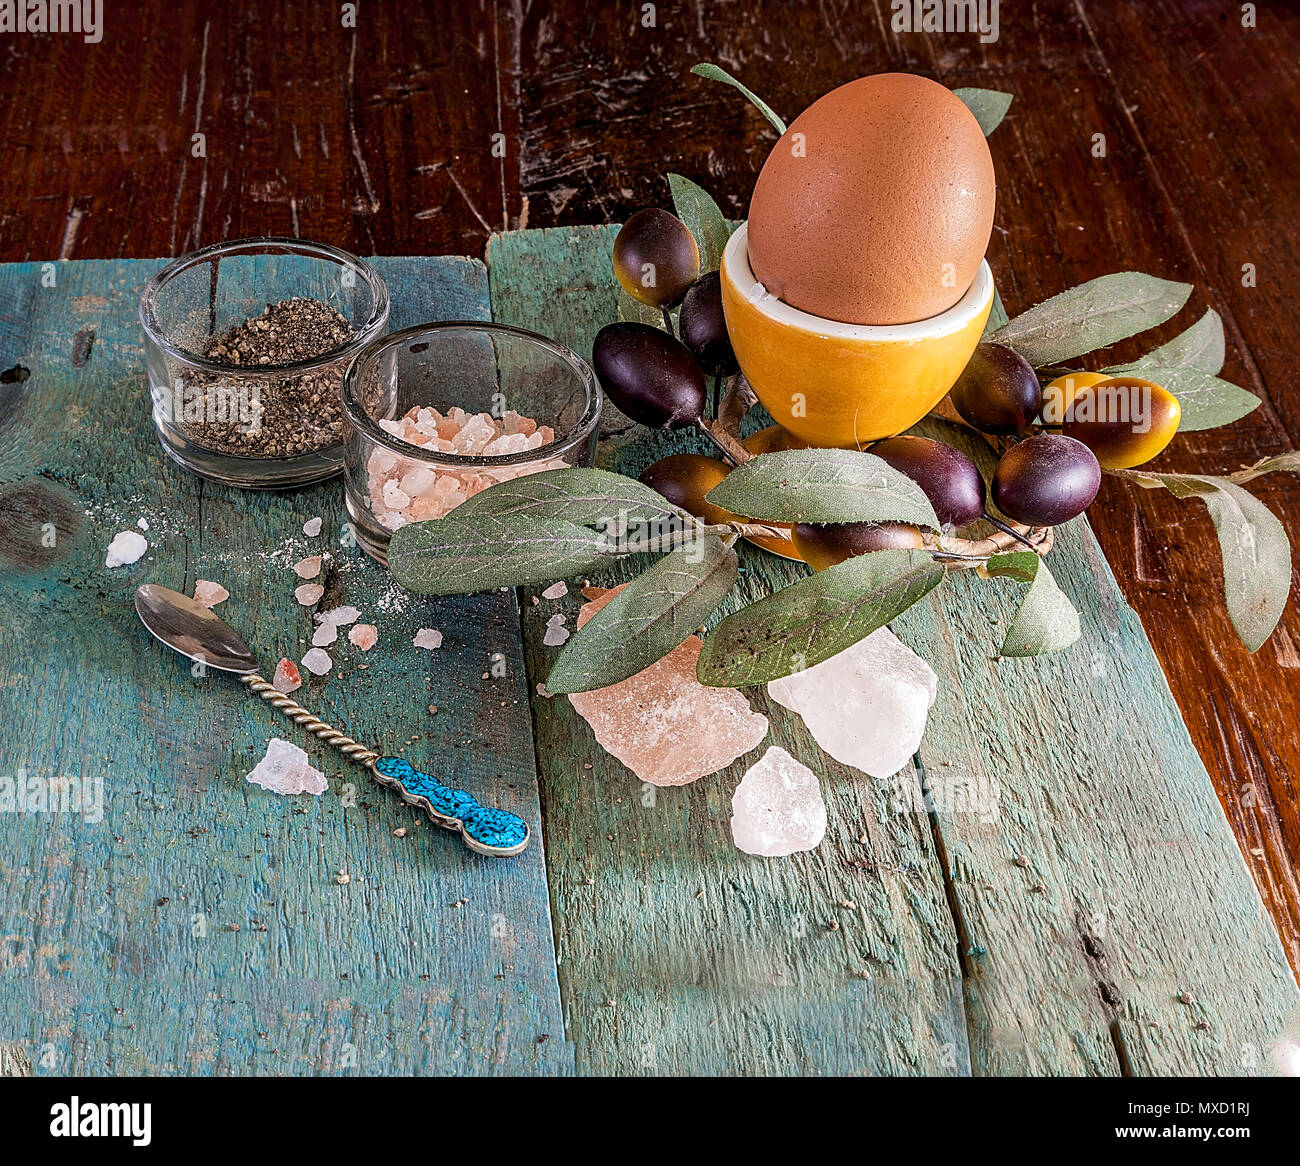 Single egg in a egg cup on a wooden surface with an assortment of crystal Hymalain pink salt and pepper. Olive decorative reef in the background. Stock Photo